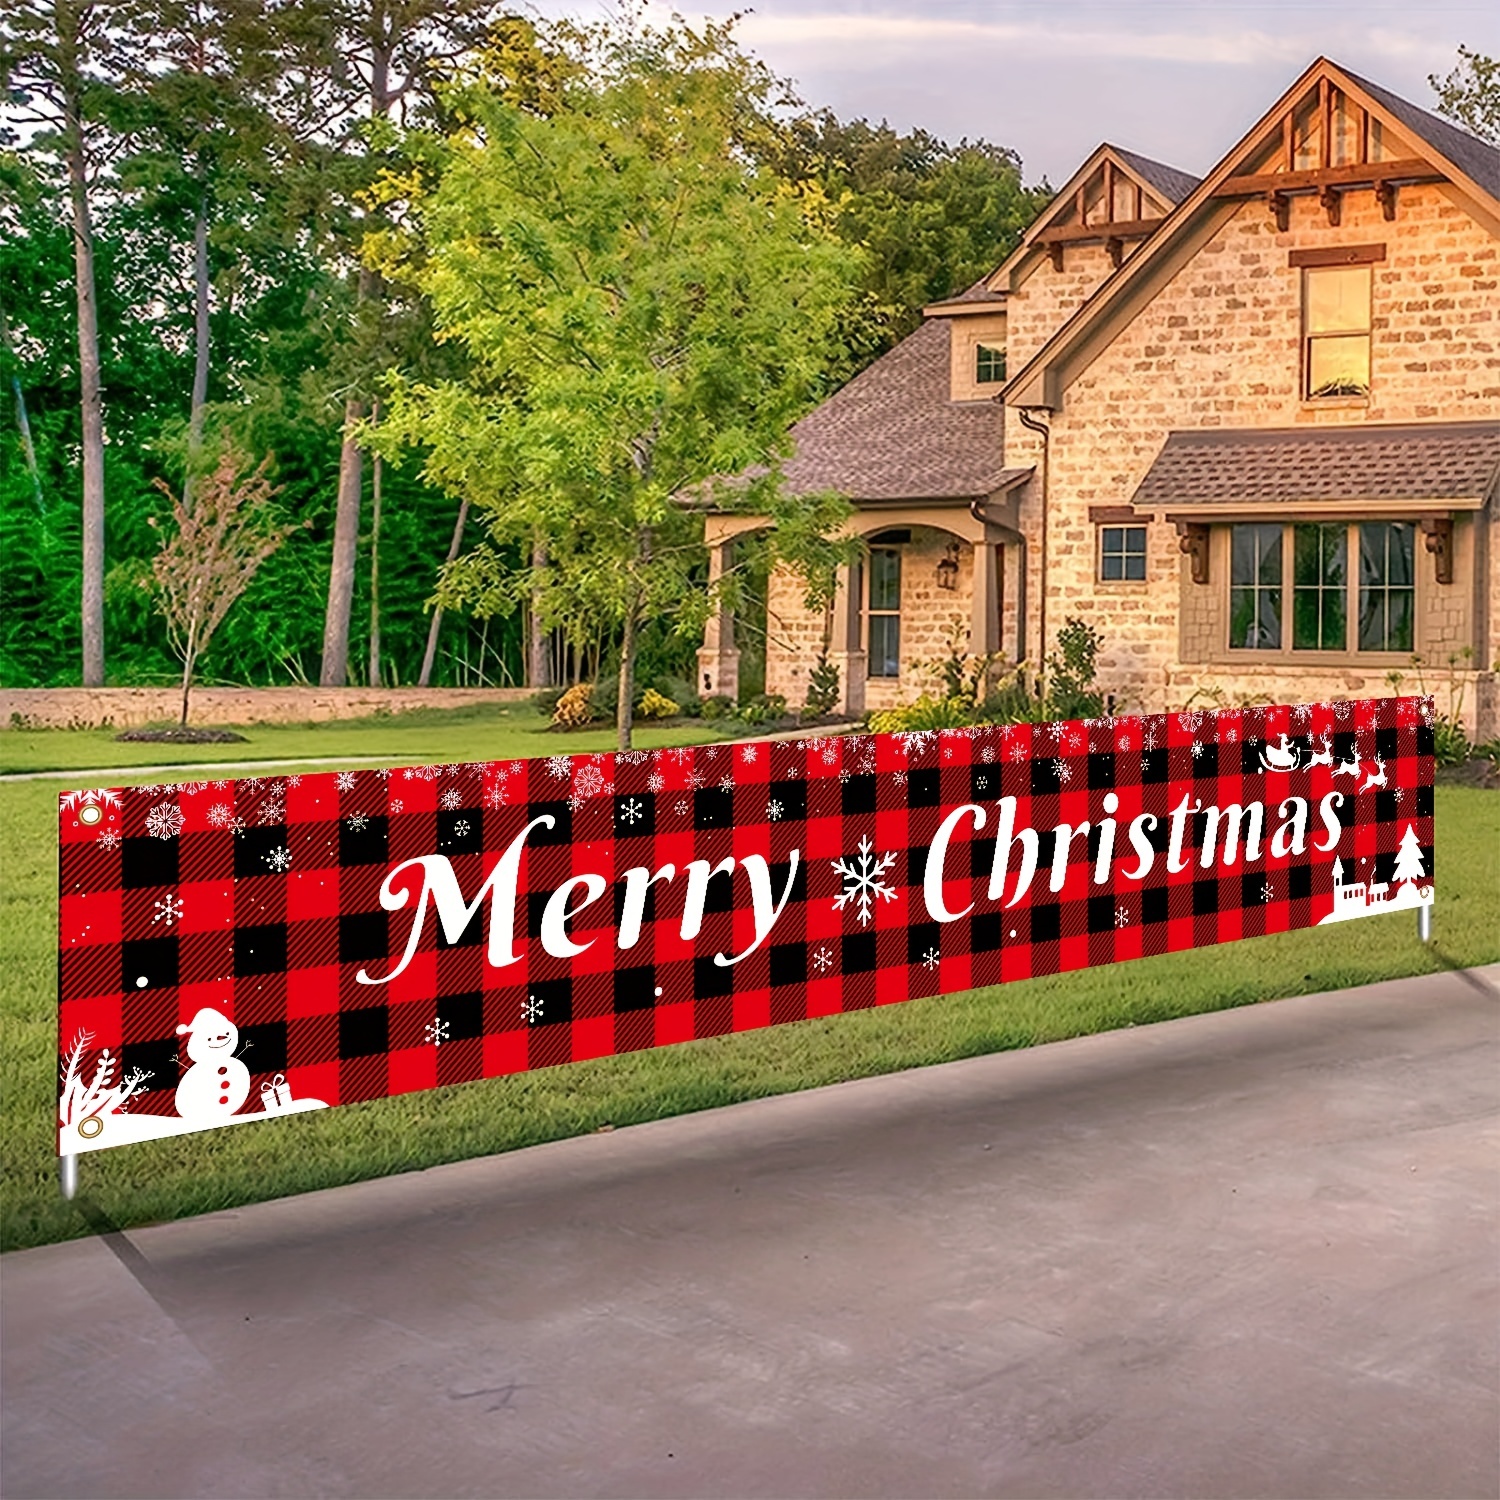 

1pc, Large Merry Christmas Decoration Banner Xmas Red Buffalo Plaid Hanging Huge Sign Holiday Party Supplies Home Decor For Outdoor, Indoor, Yard, Garden, Porch, Lawn, Christmas Party Decor Supplies